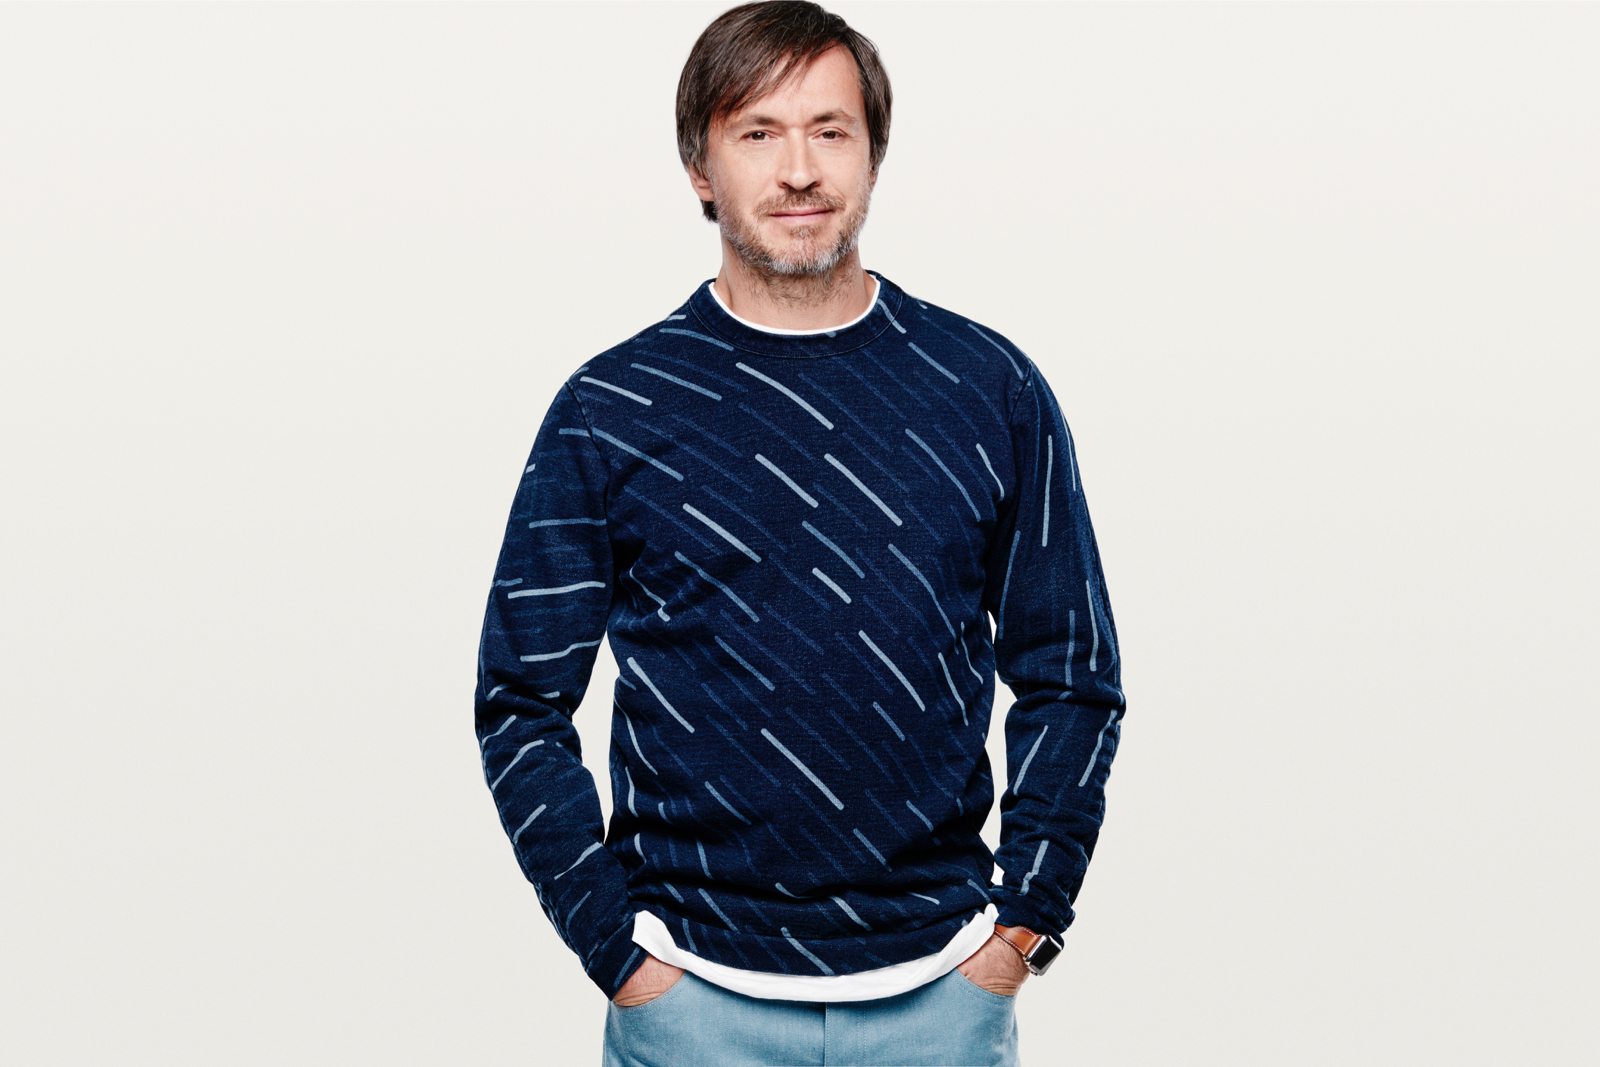 Marc Newson says auto industry is 'at the bottom of a trough